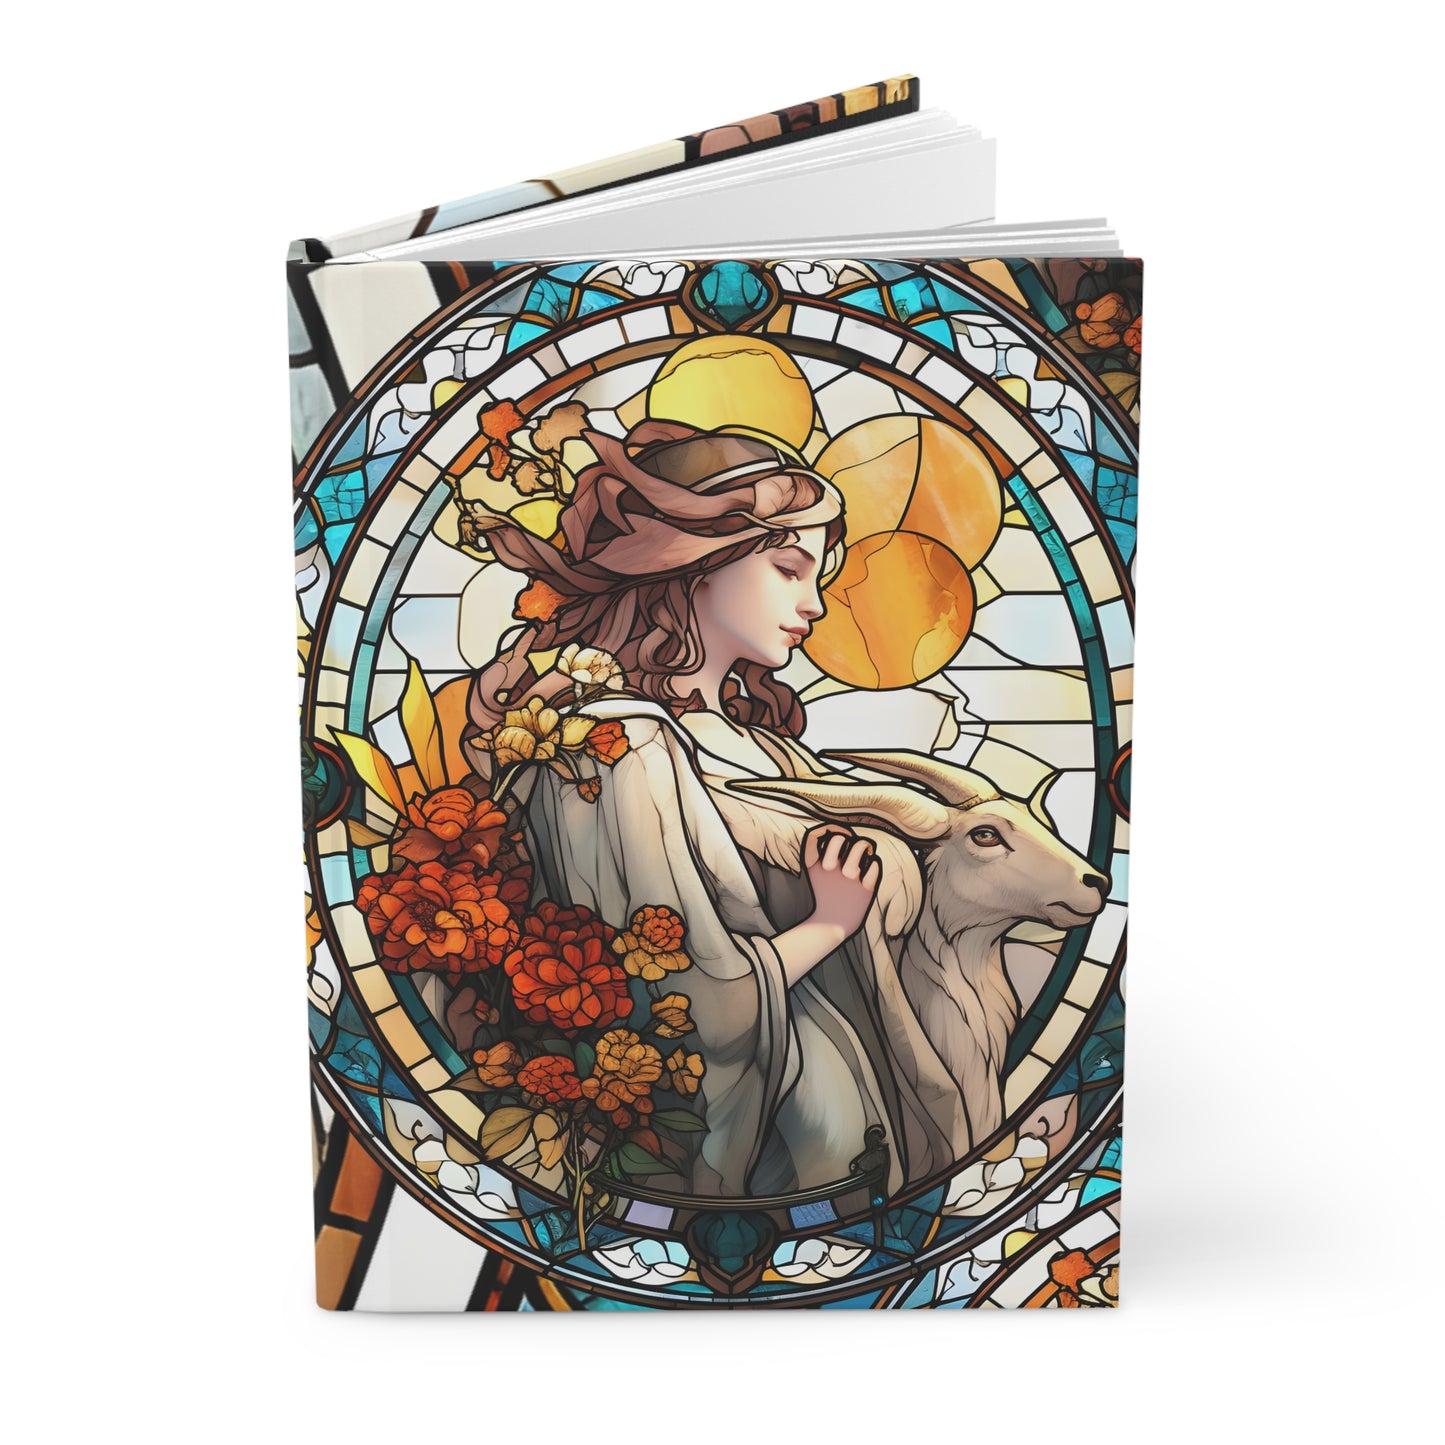 Capricorn Stained Glass Illustration with Poem Hardcover 150 Page Journal